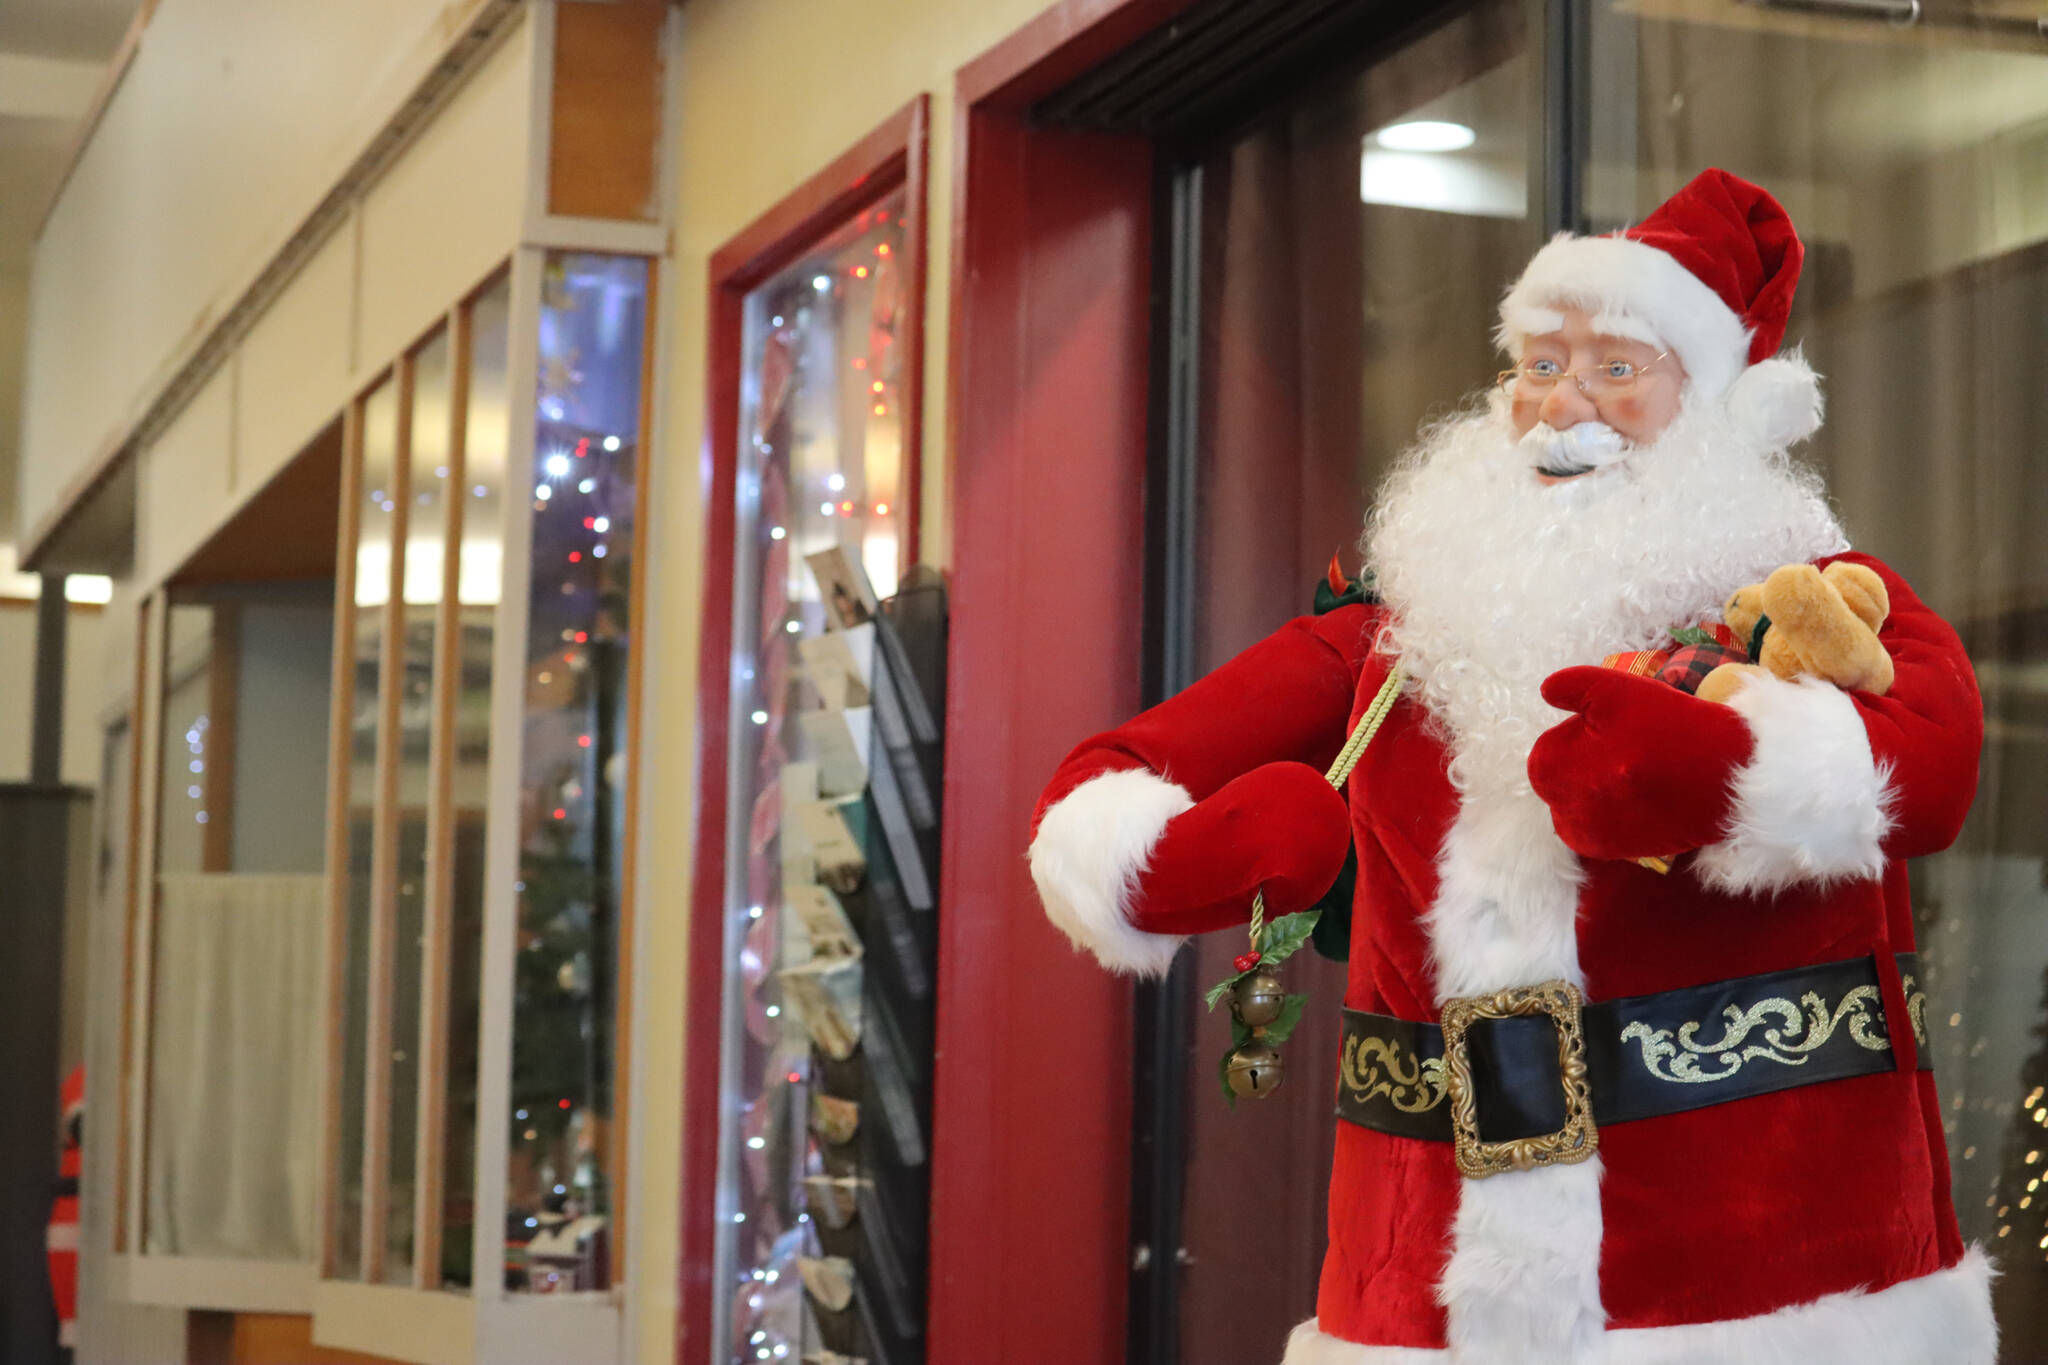 An animatronic Santa Claus greets Juneau patrons at the entrance of the Nugget Mall on Thursday. (Jonson Kuhn / Juneau Empire)